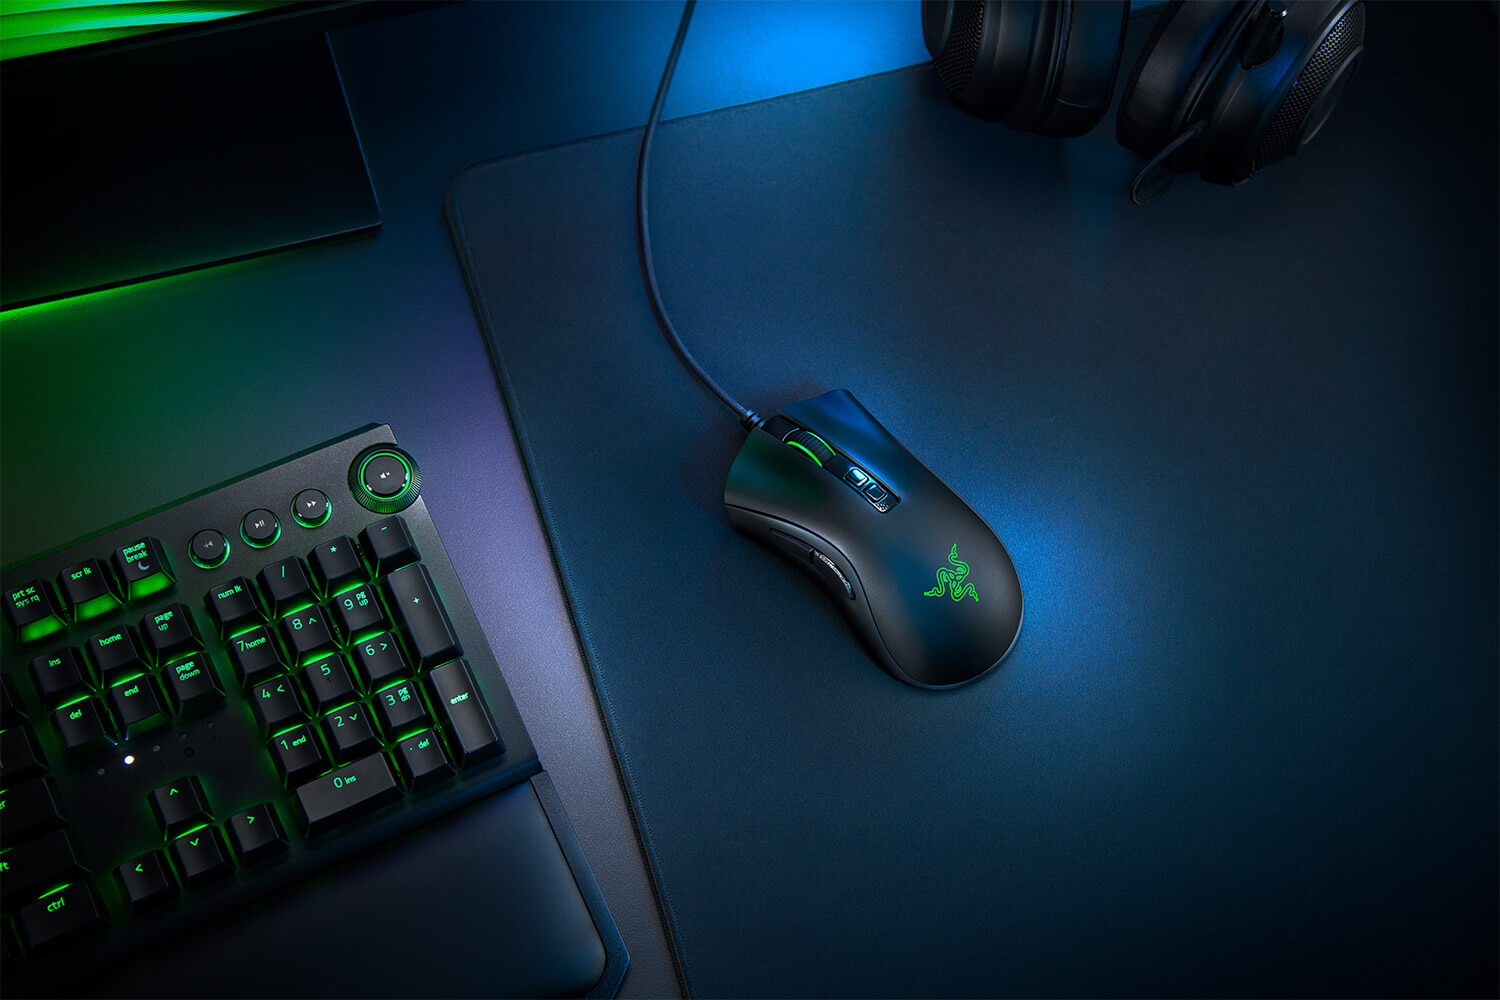 The Razer DeathAdder V2 and Basilisk V2 gaming mice feature a 20,000 DPI sensor and optical switches